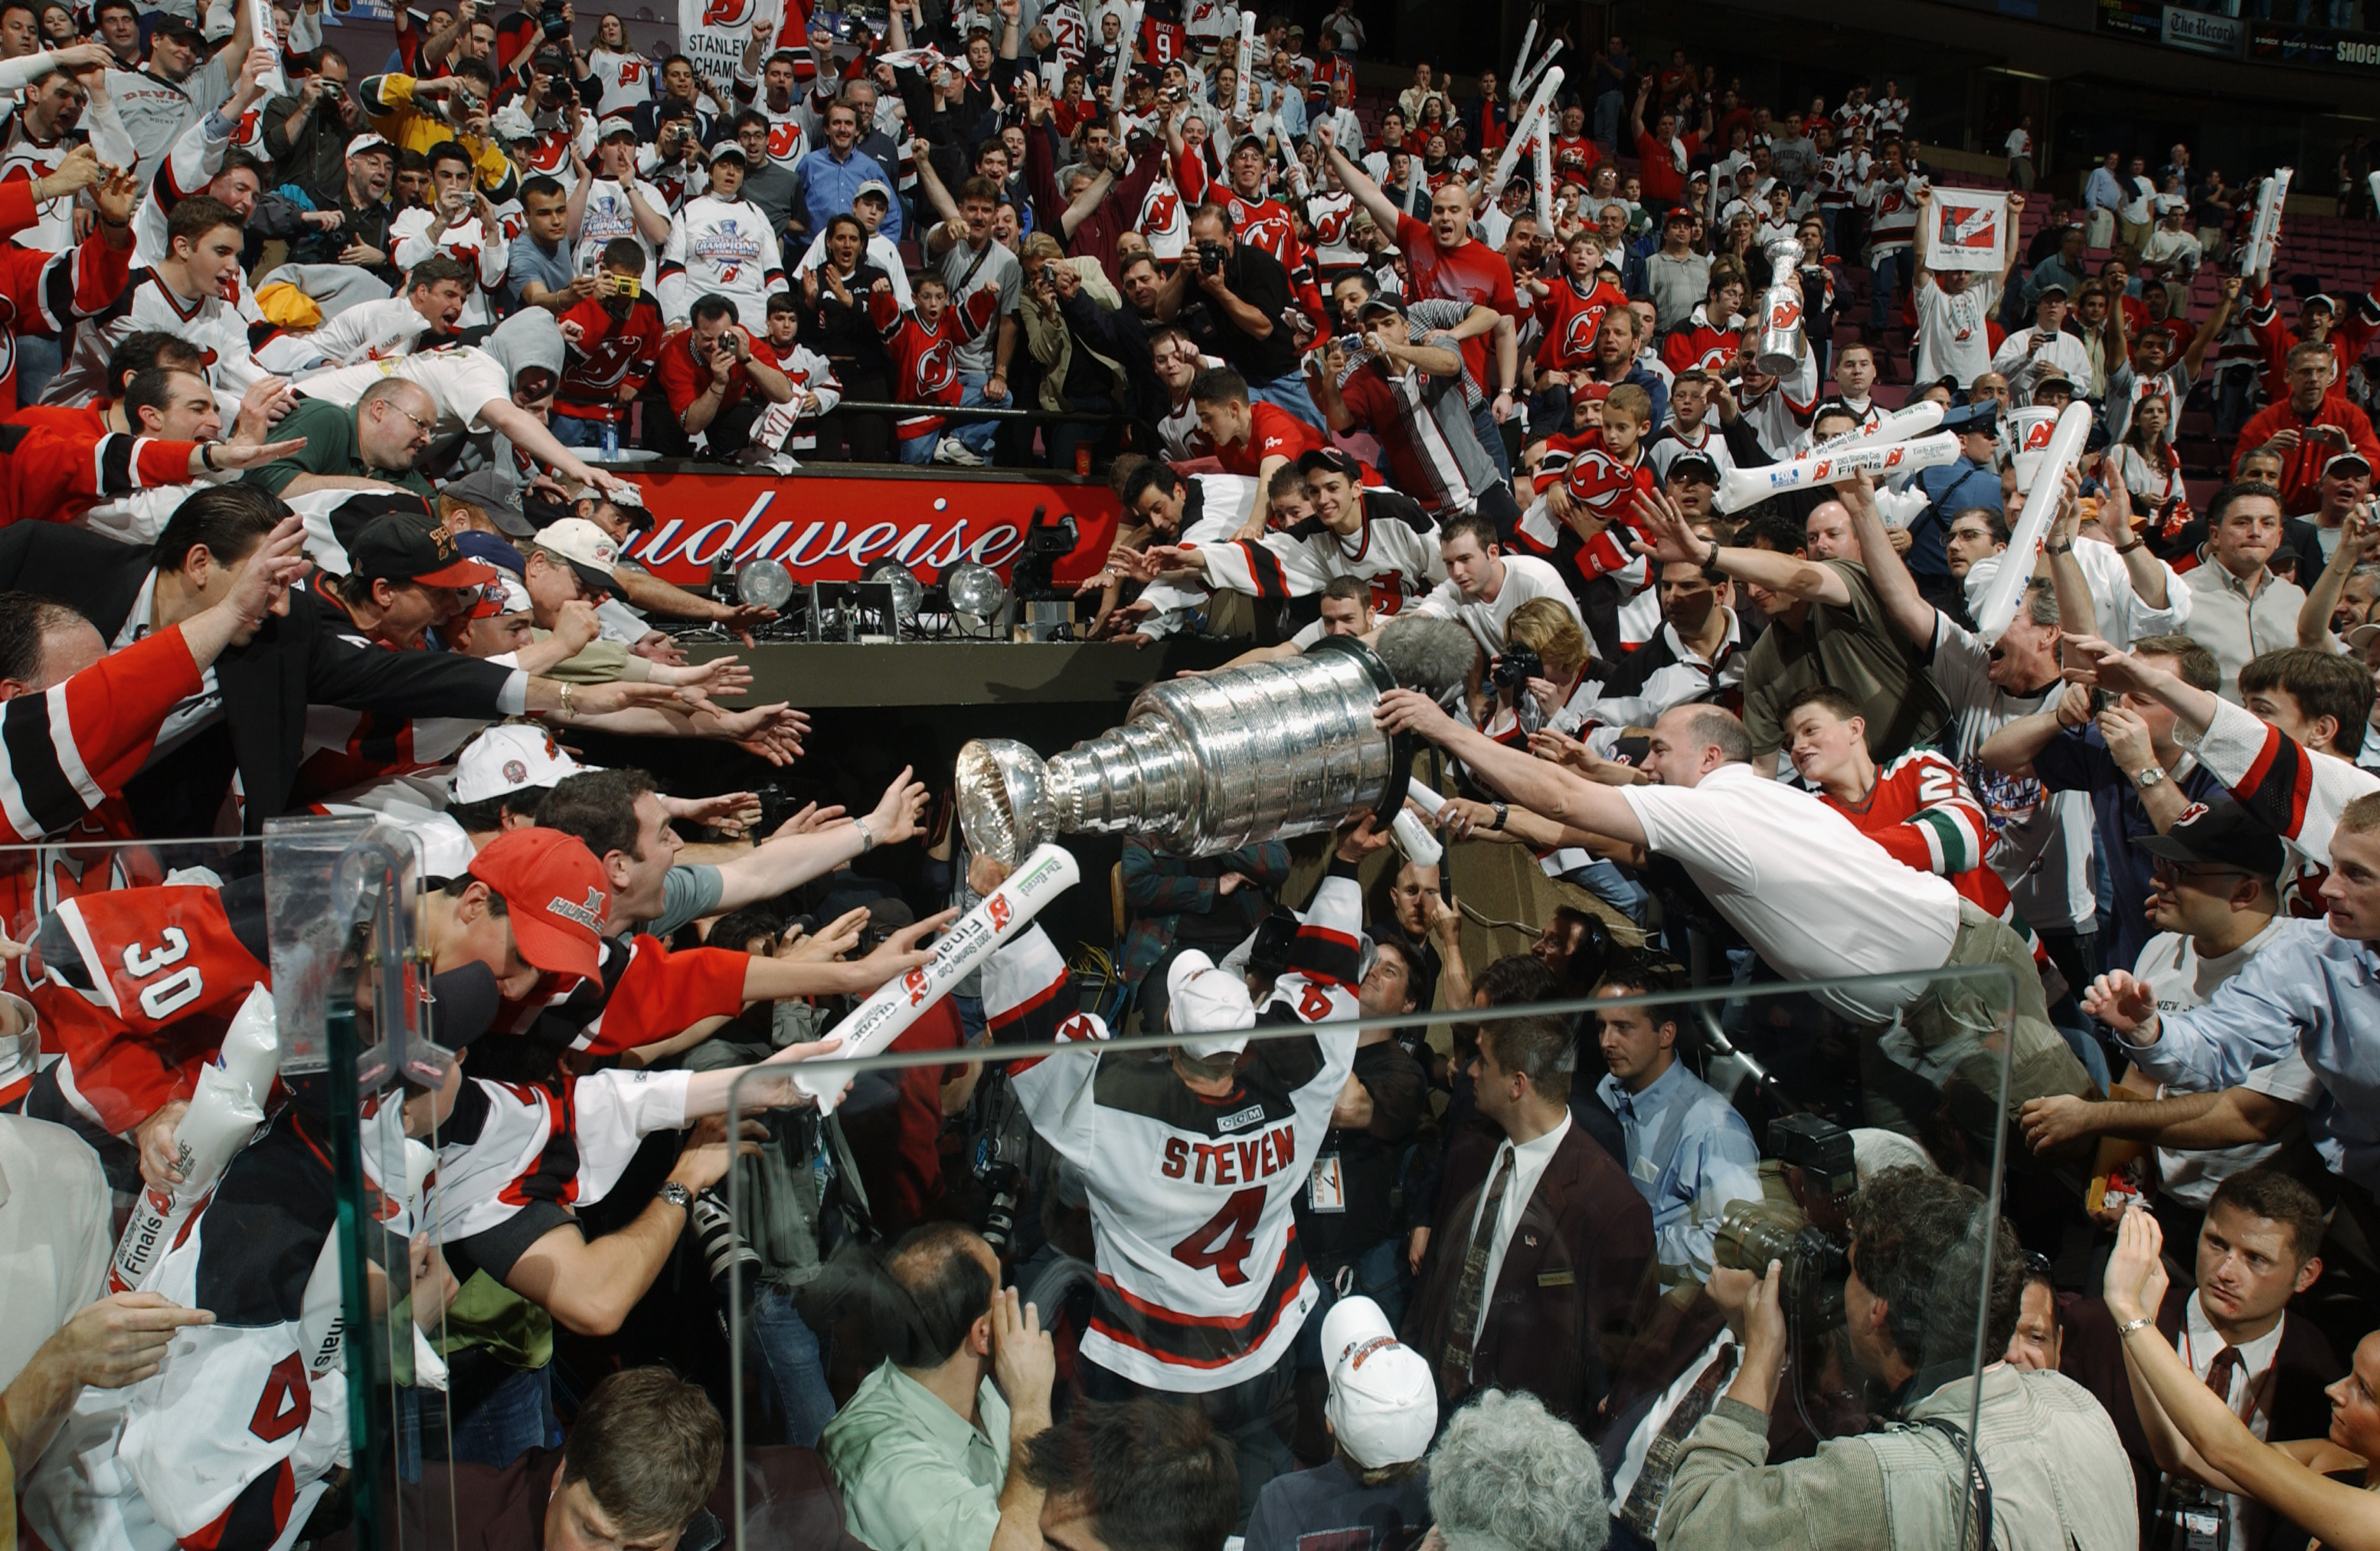 EAST RUTHERFORD, NJ - JUNE 9:  Scott Stevens of the New Jersey Devils carries the Stanley Cup holds up the Stanley Cup after beating the Mighty Ducks of Anaheim in game seven of the 2003 Stanley Cup Finals at Continental Airlines Arena on June 9, 2003 in